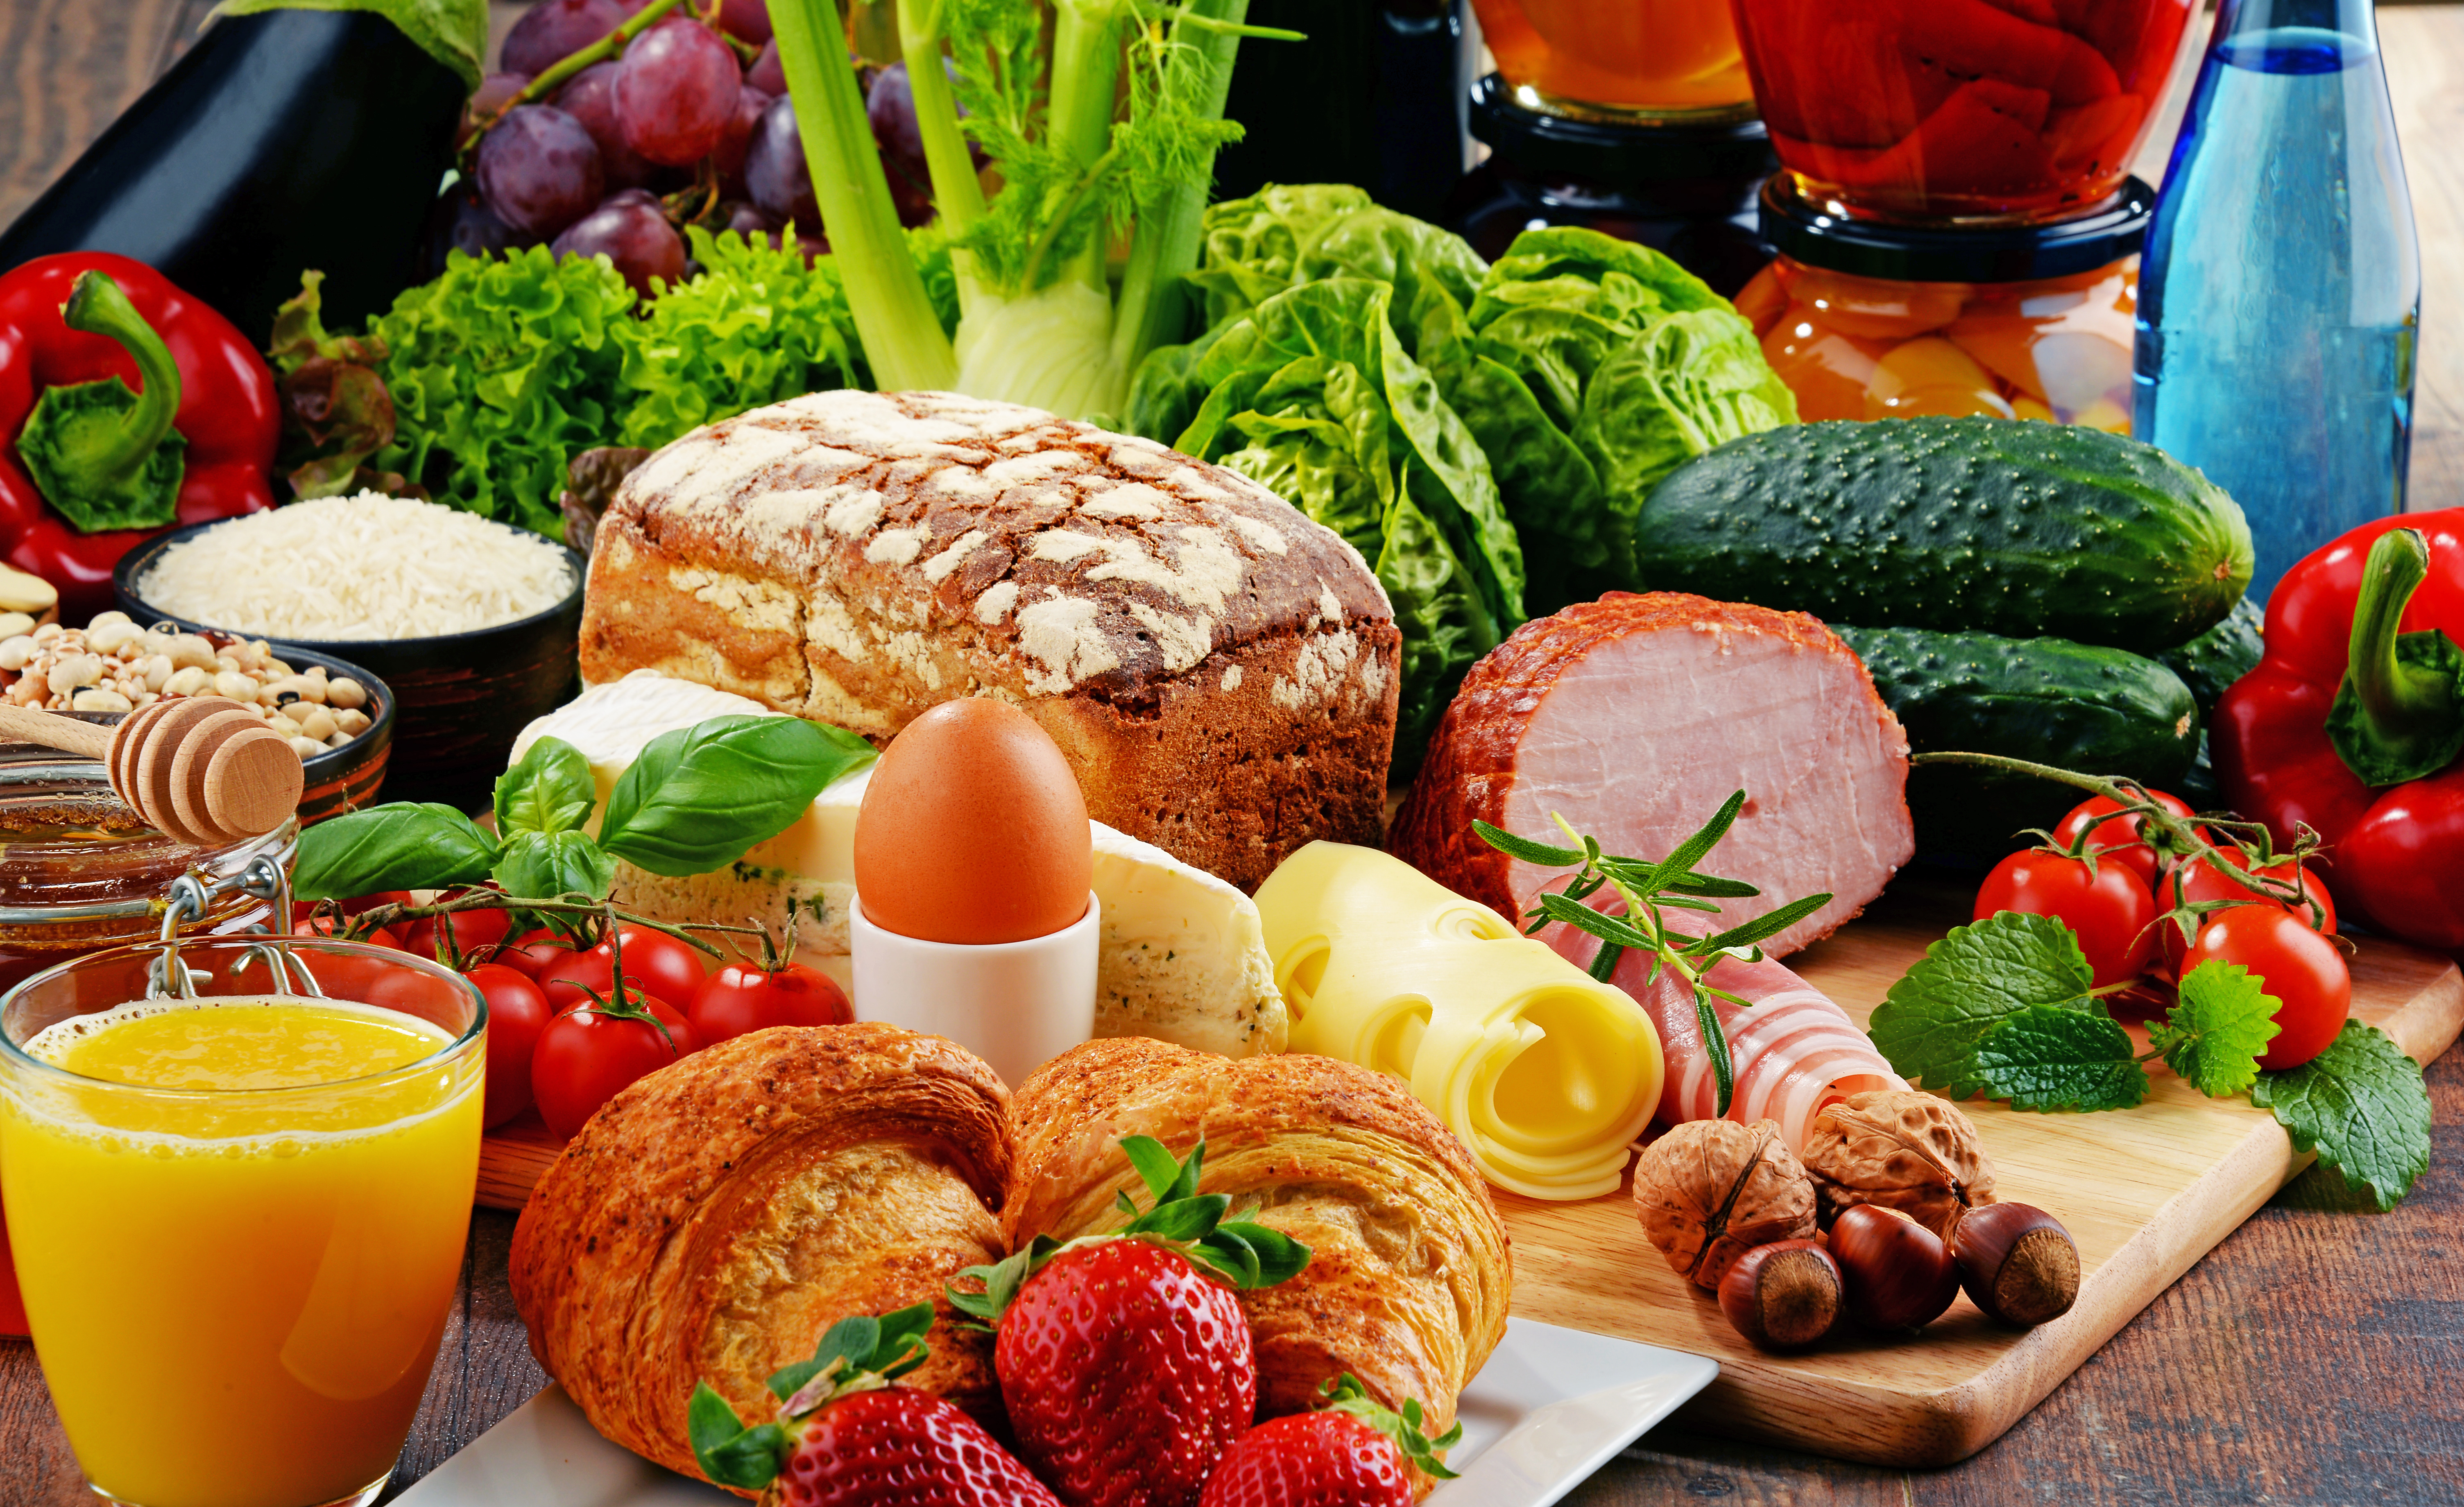 vegetable, food, still life, bread, cheese, croissant, egg, juice, meat, strawberry